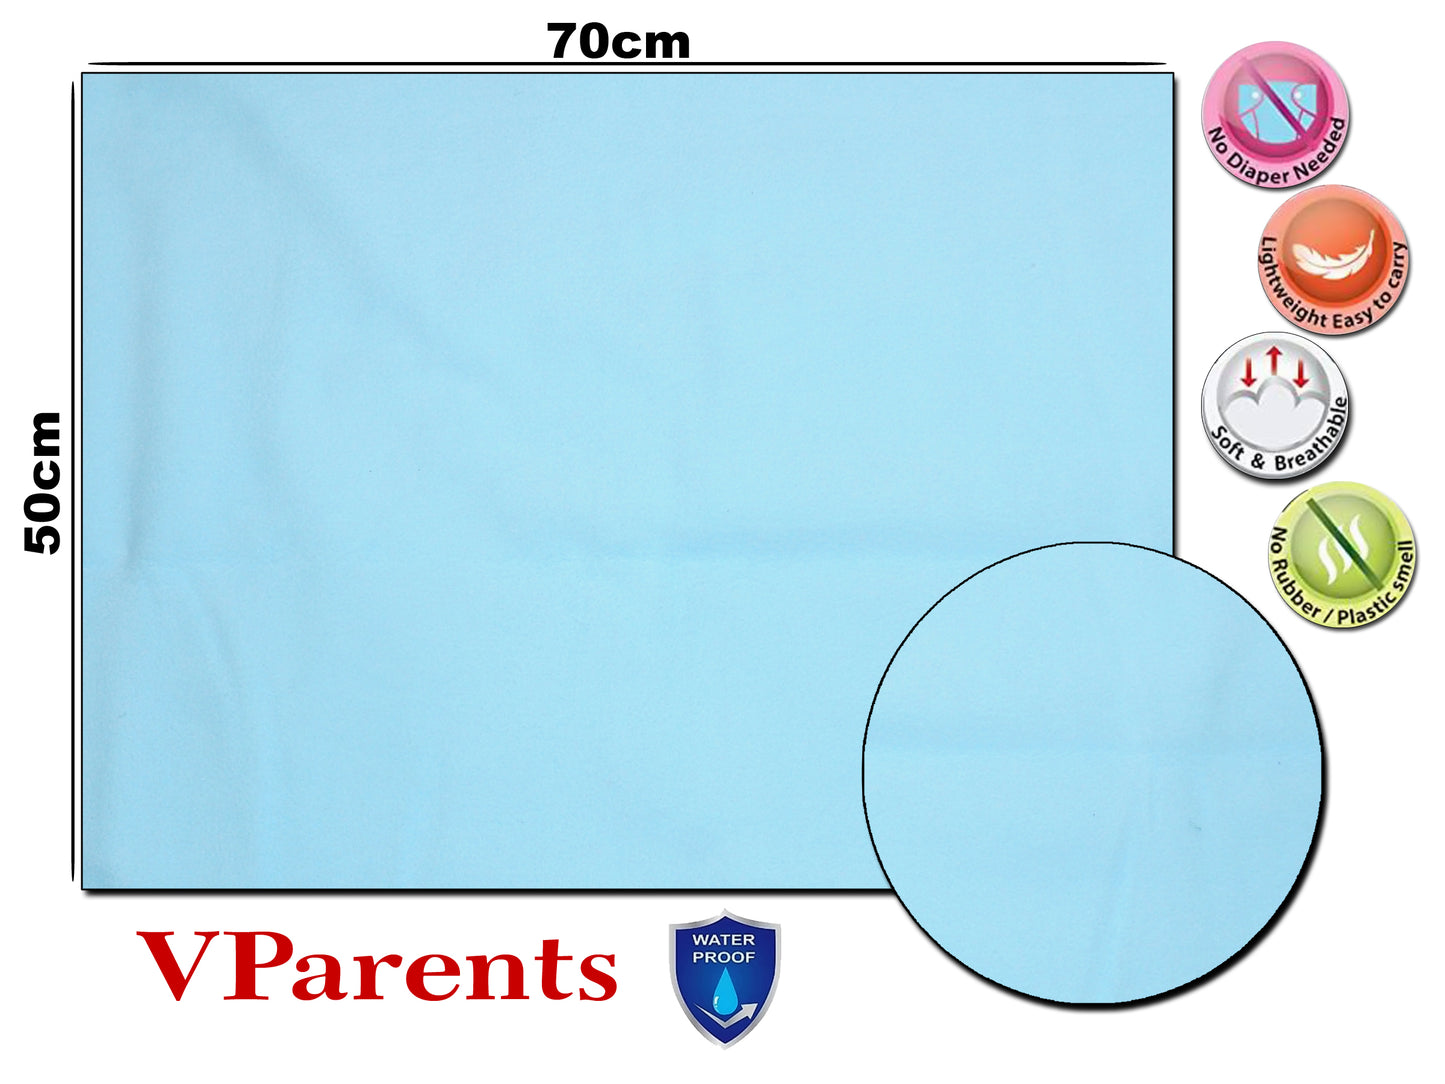 VParents mite Baby Bedding Set with Pillow and Drysheet Combo